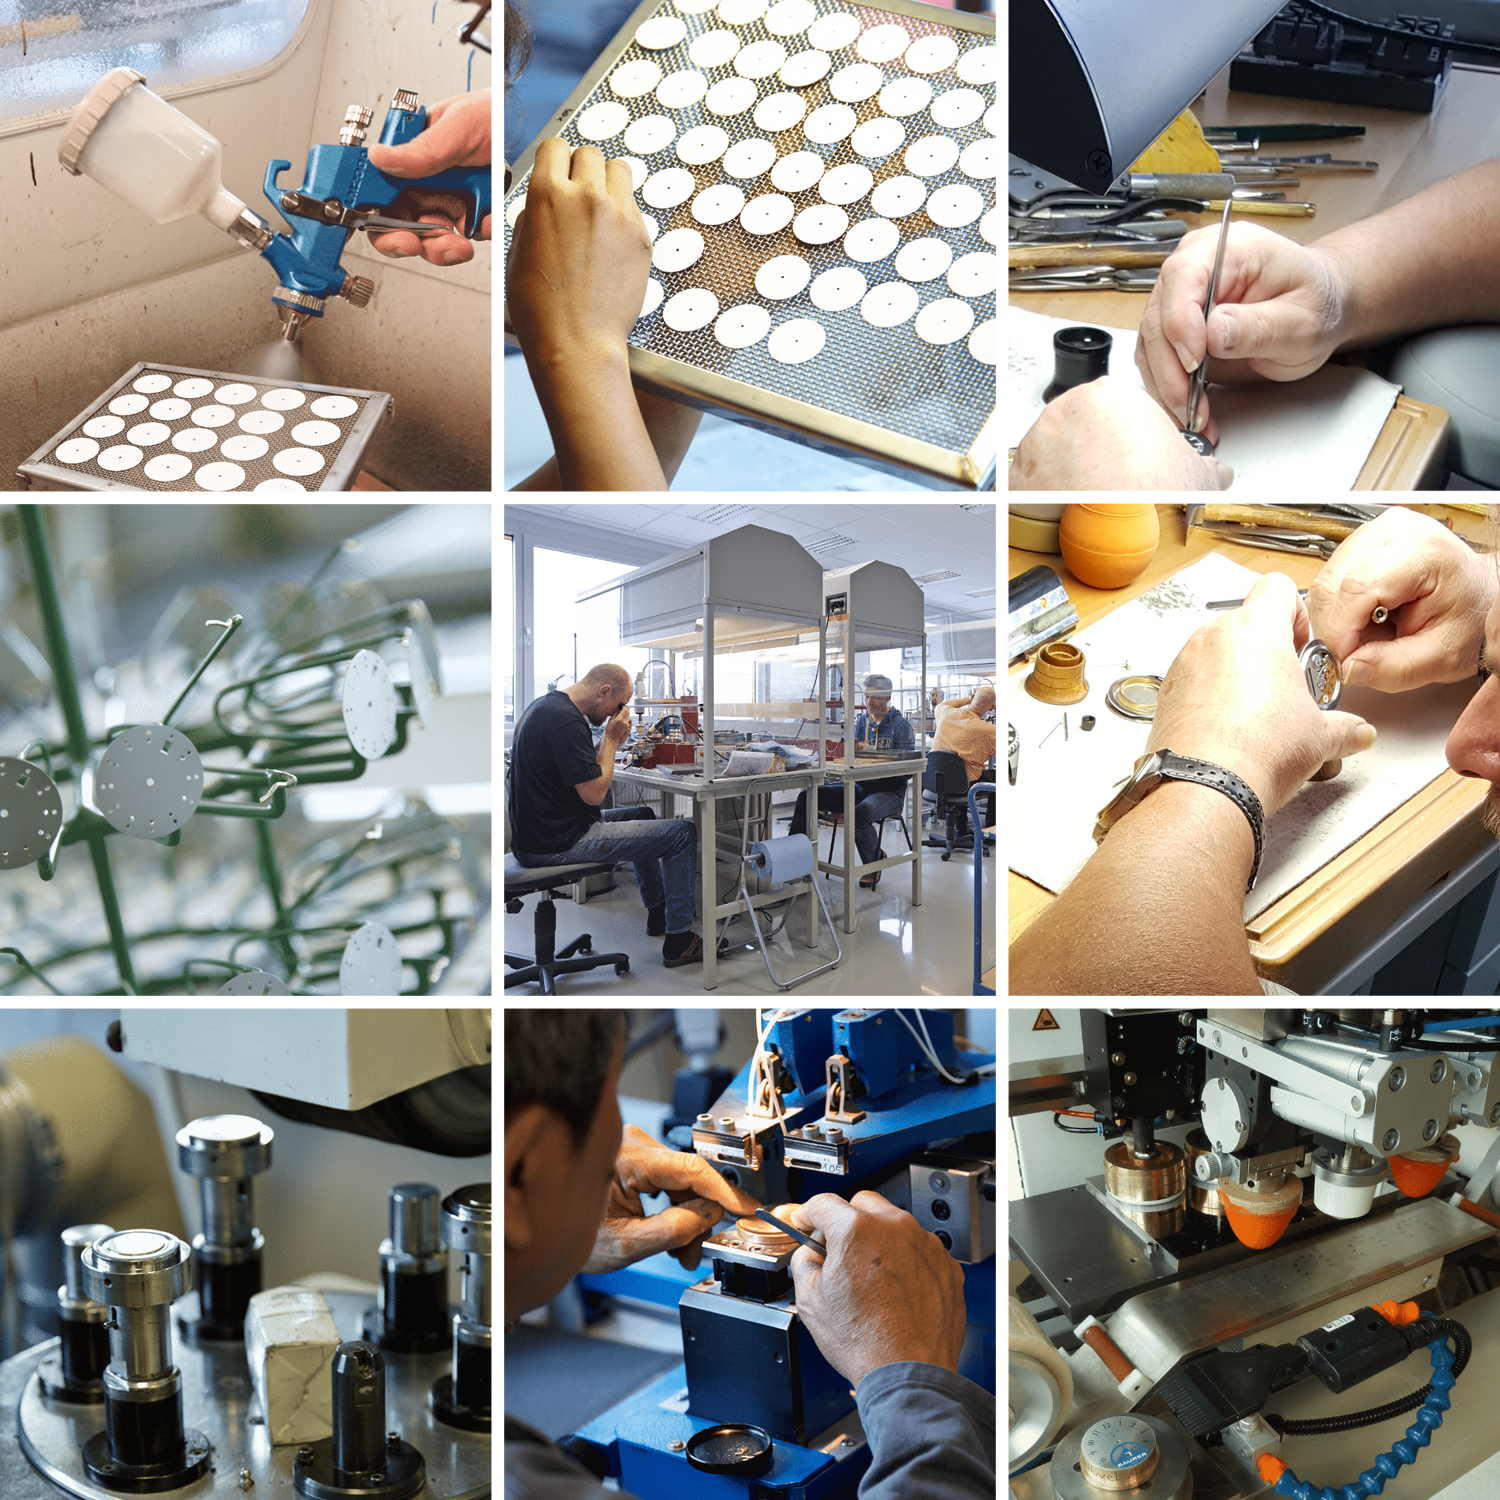 production-insides-BWG-Bavarian-watch-supplier